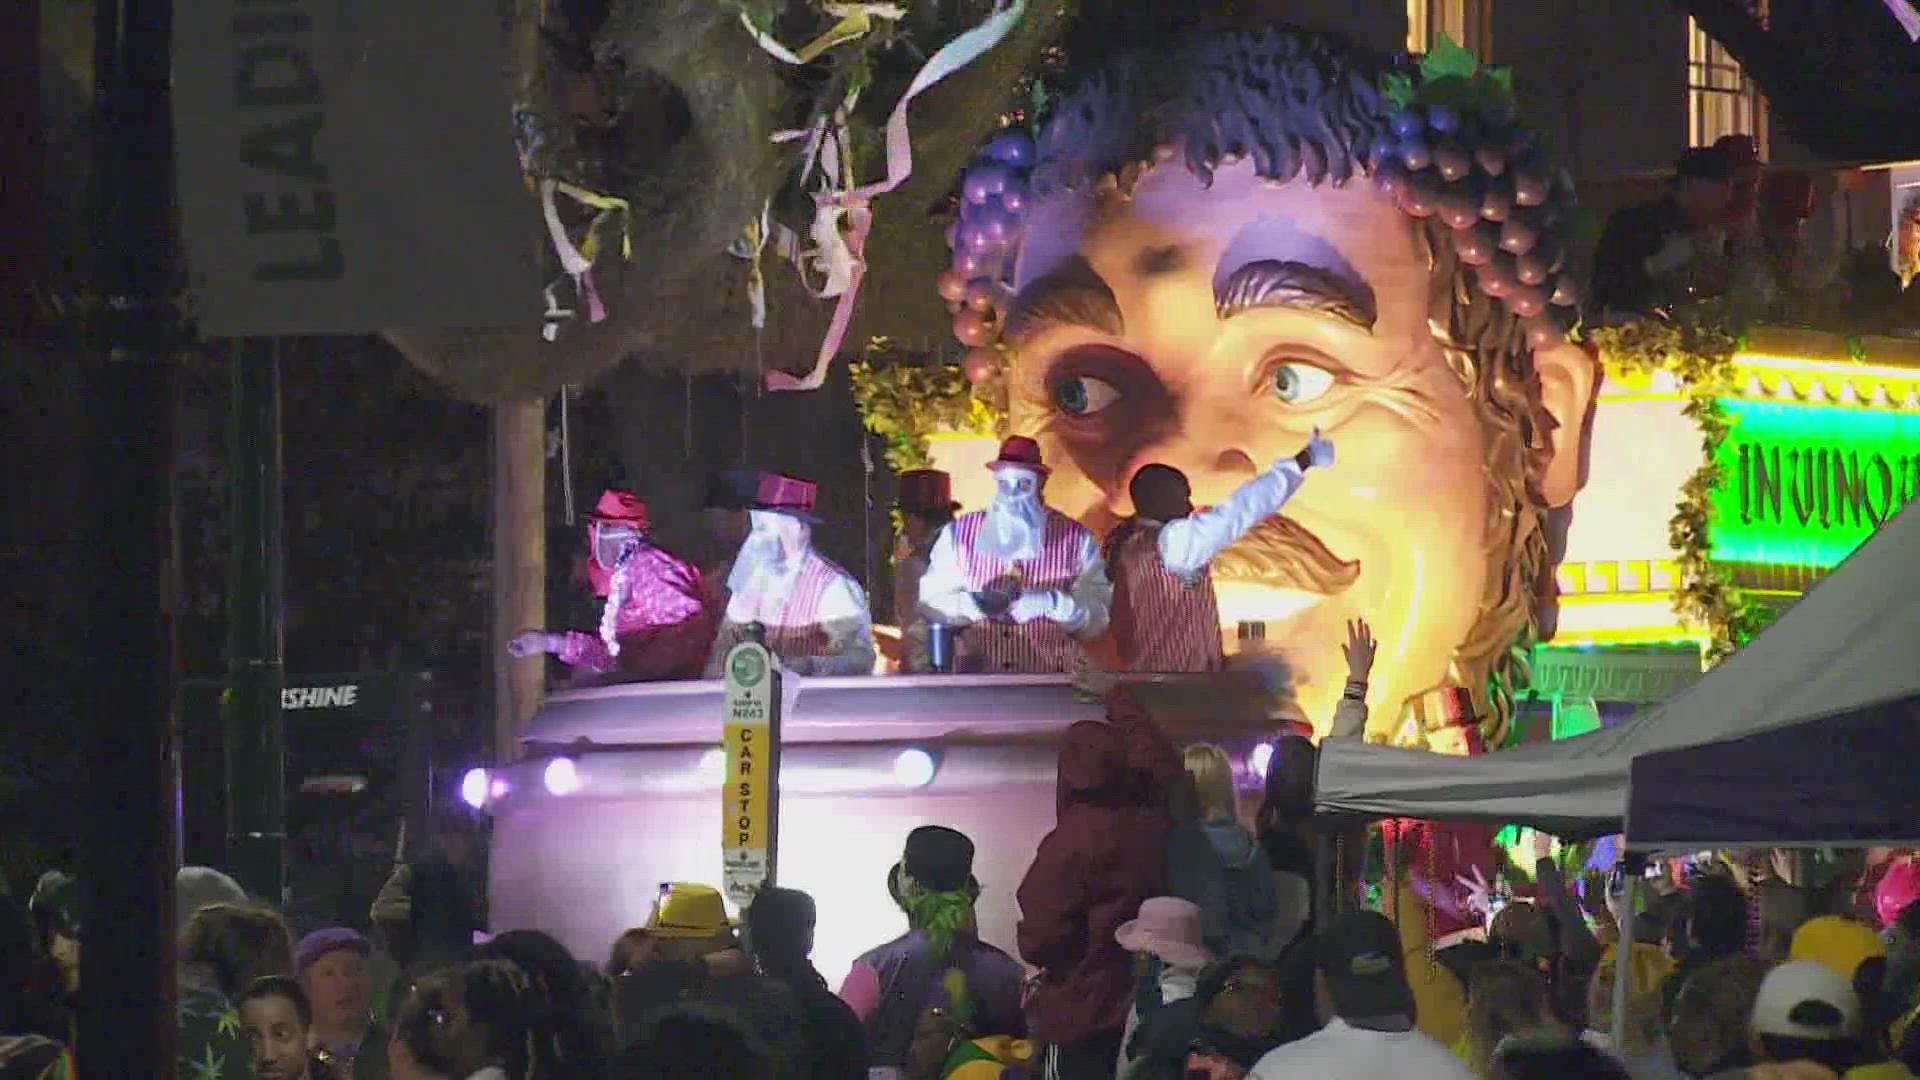 Mardi Gras traditions are taking the backseat to reveler safety, as the city of New Orleans battles a police shortage.